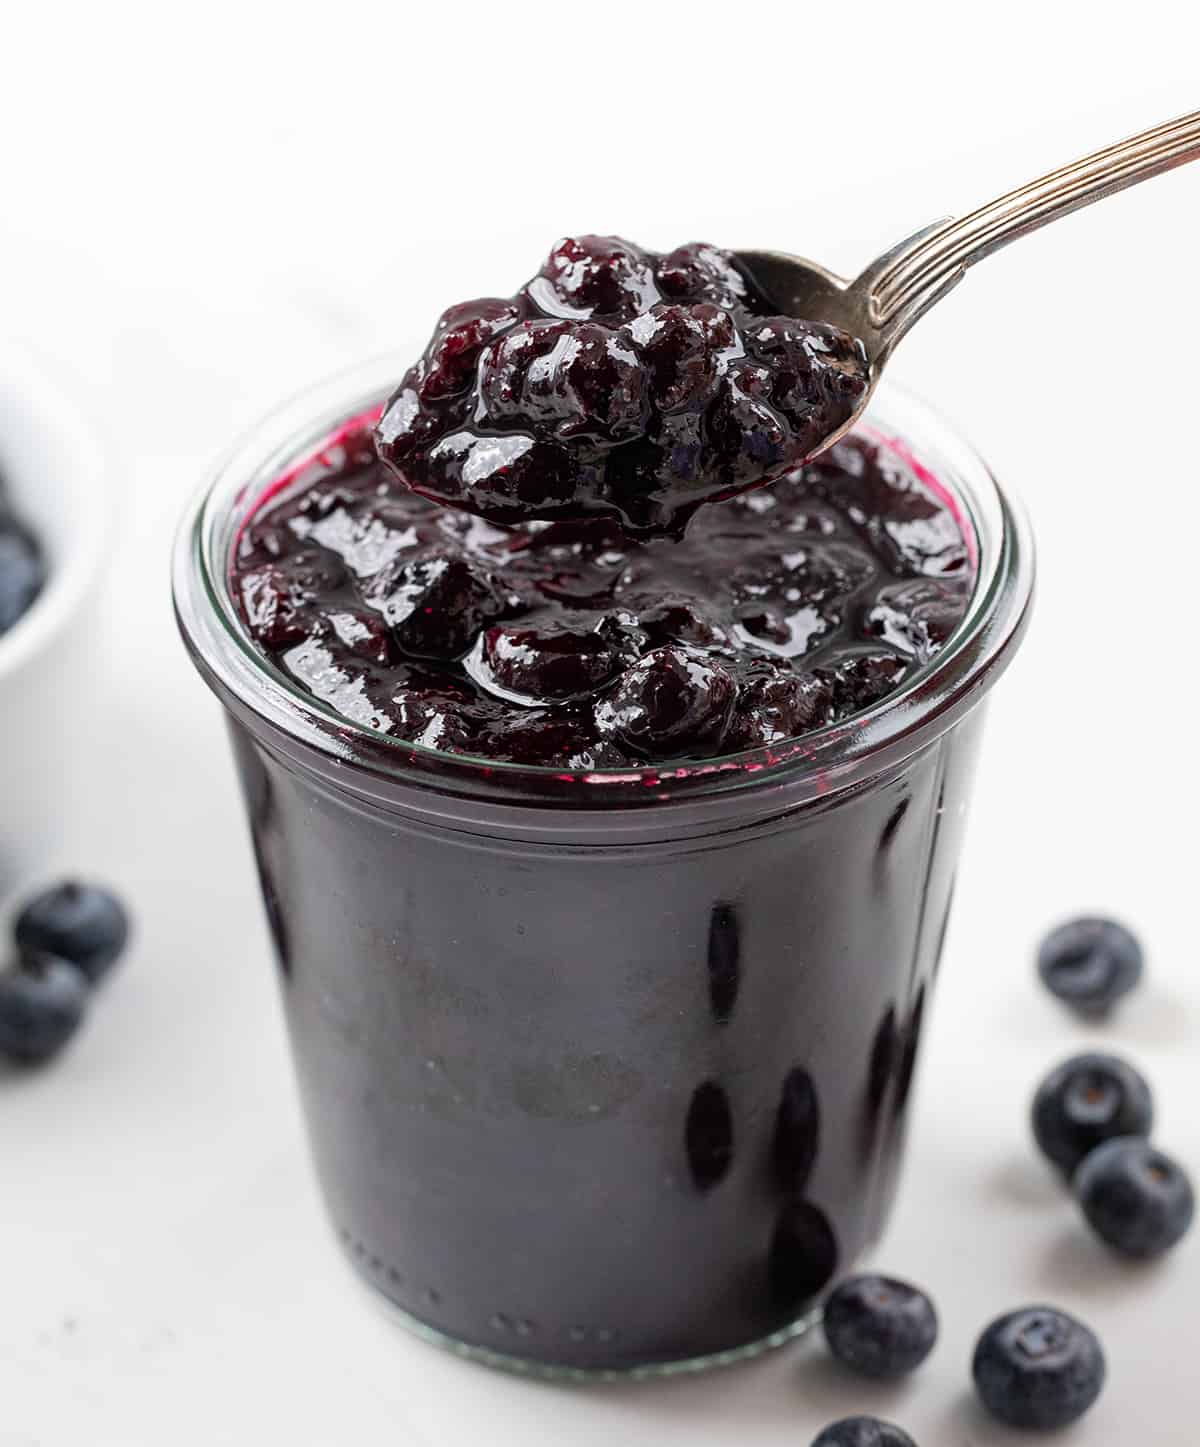 Jar of Blueberry Jam that doesn't use pectin with a spoon picking up a big portion.